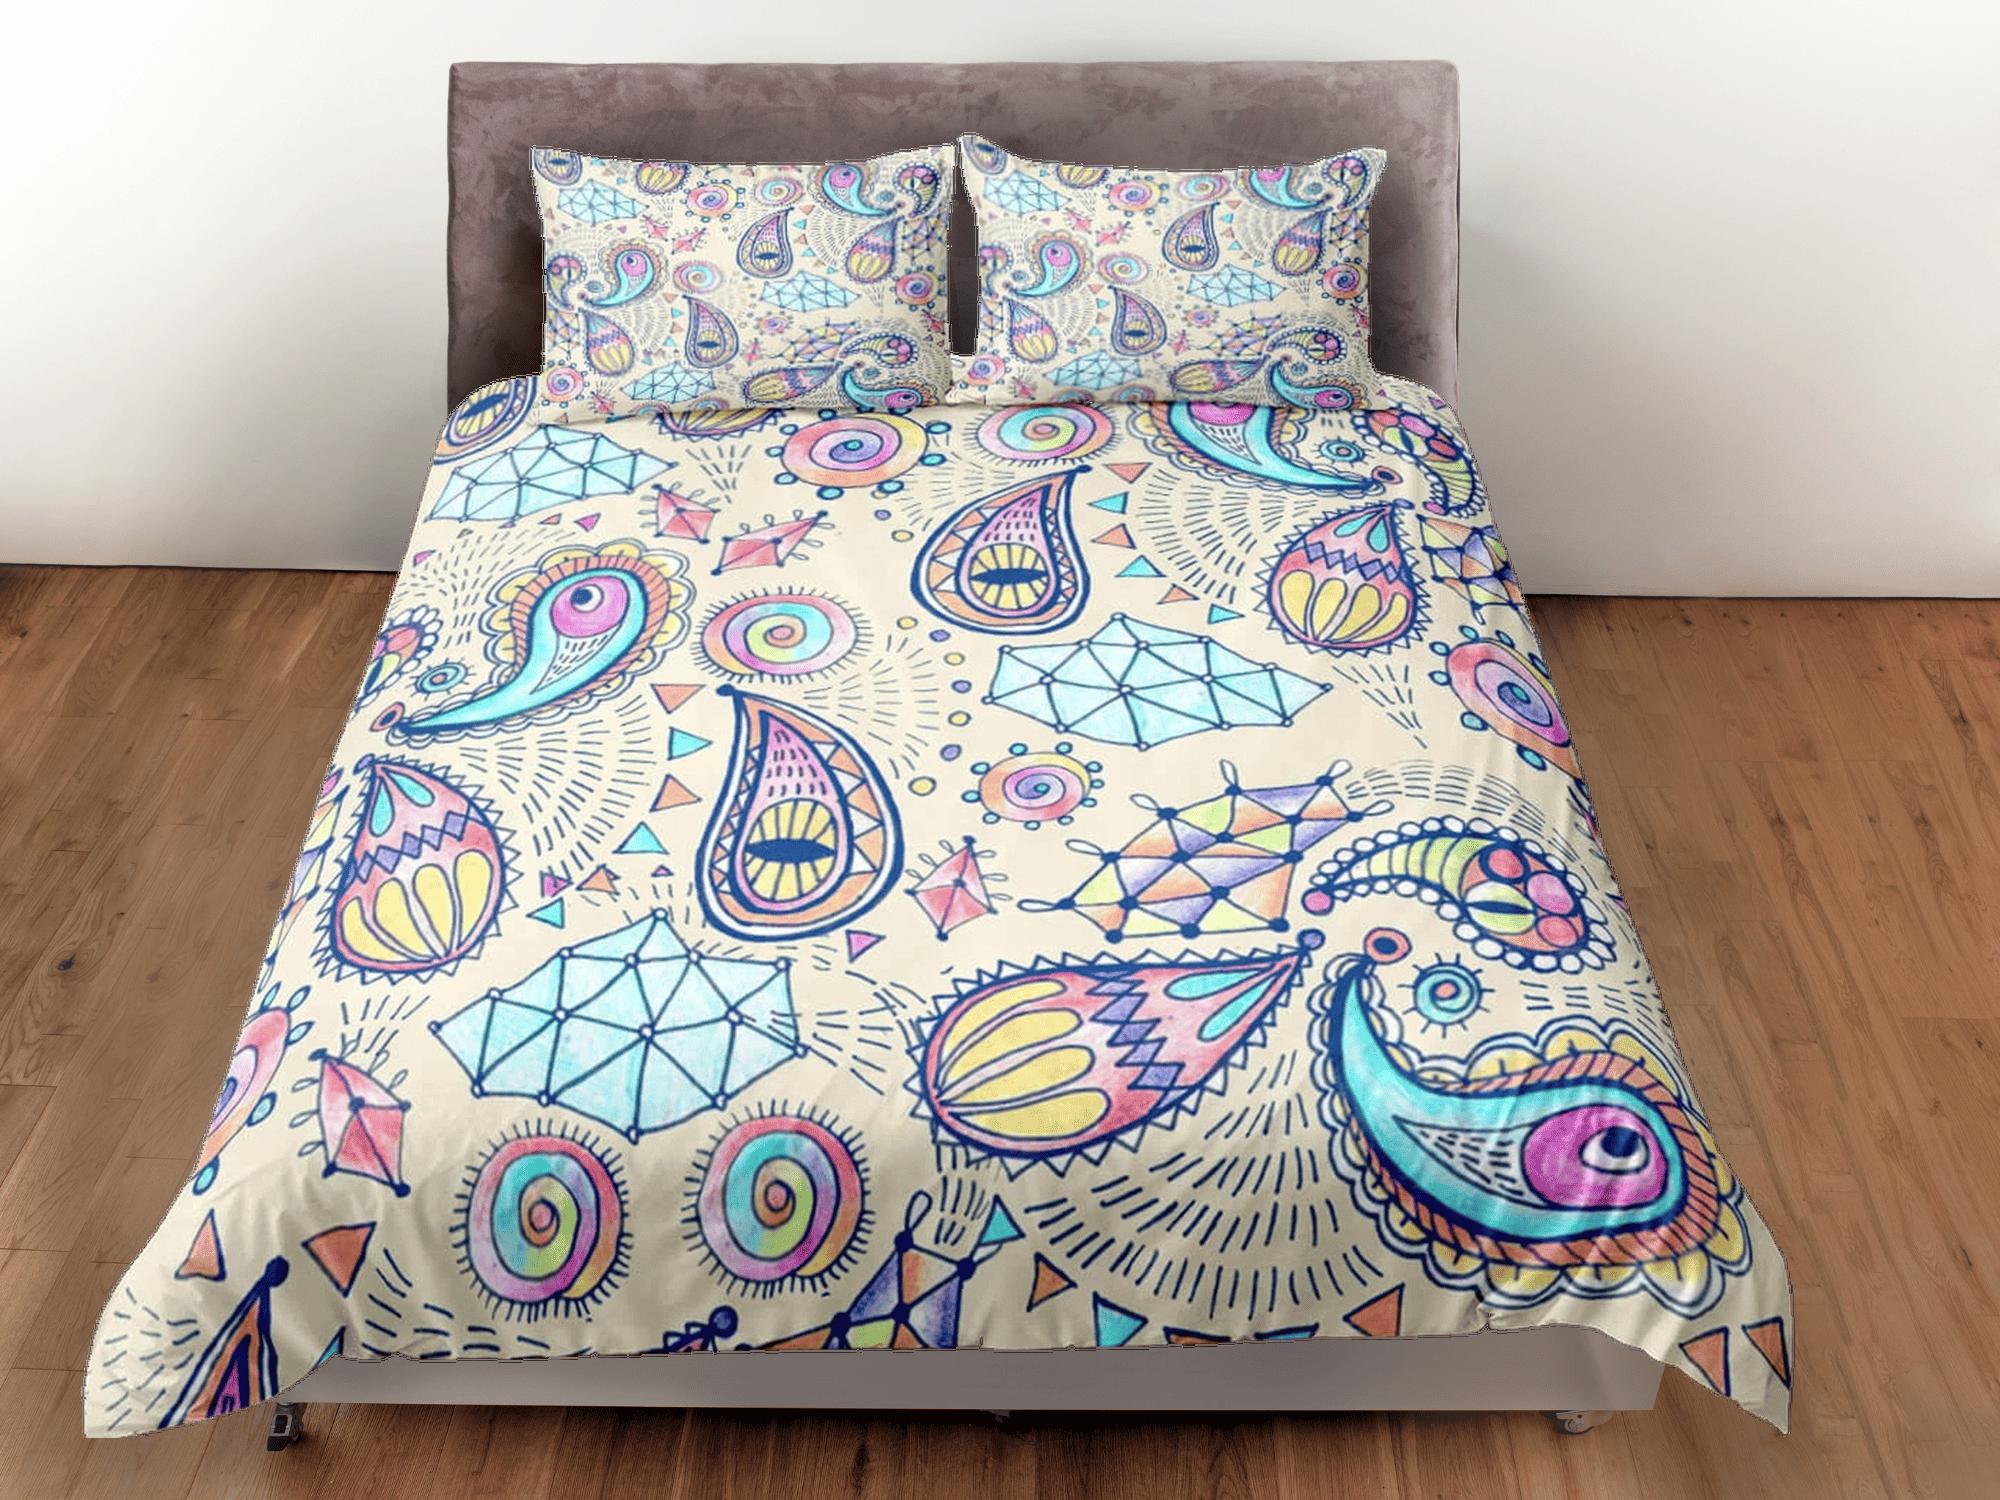 daintyduvet Paisley duvet cover set in pastel colors, aesthetic room decor bedding set full, king, queen size, abstract boho bedspread, luxury bed cover